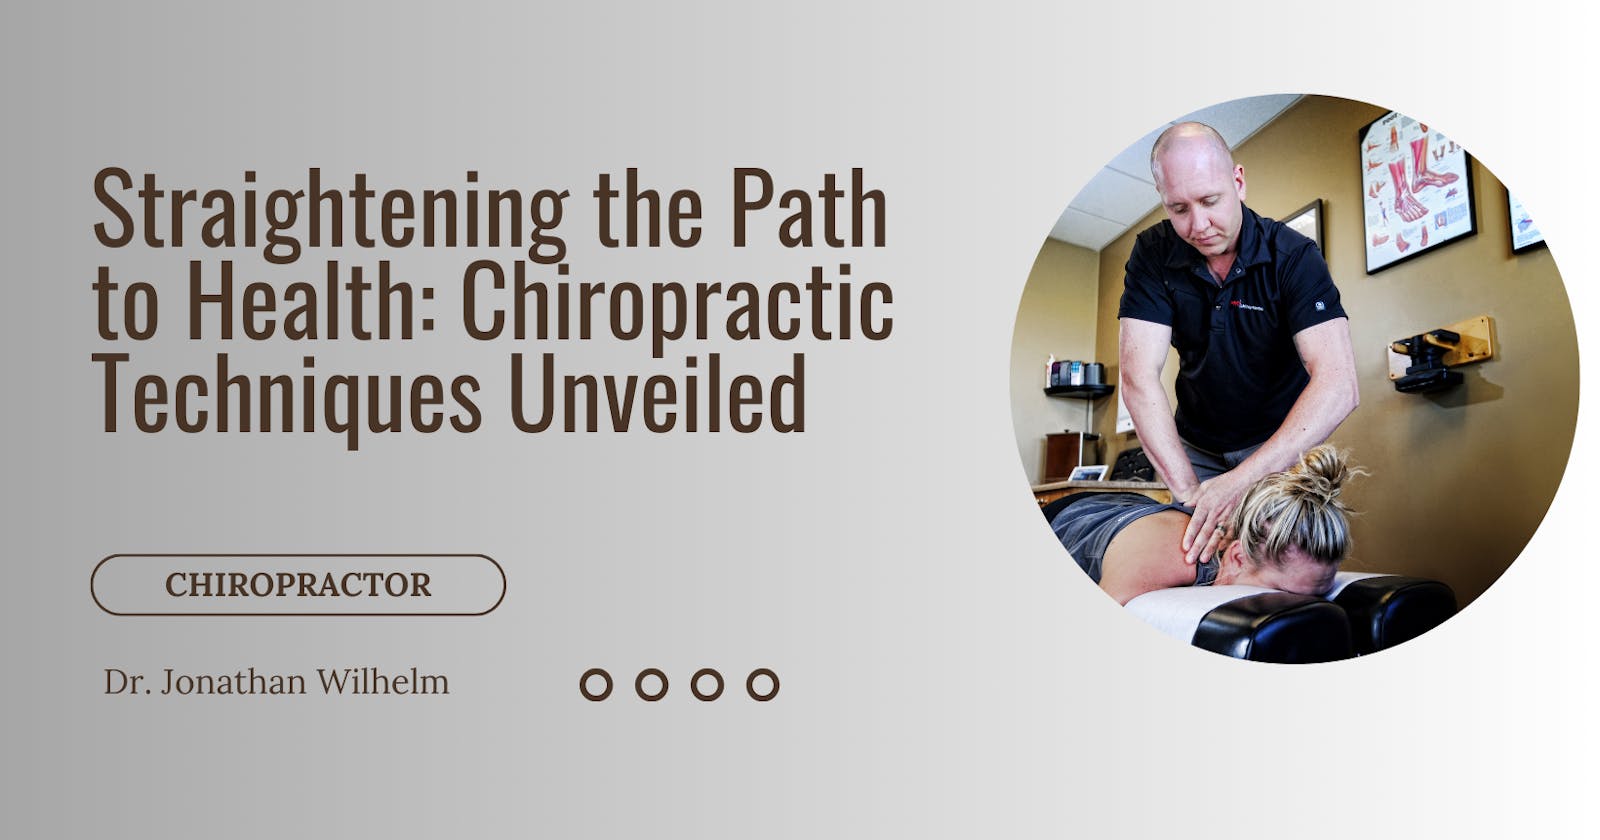 Jonathan Wilhelm | Straightening the Path to Health: Chiropractic Techniques Unveiled